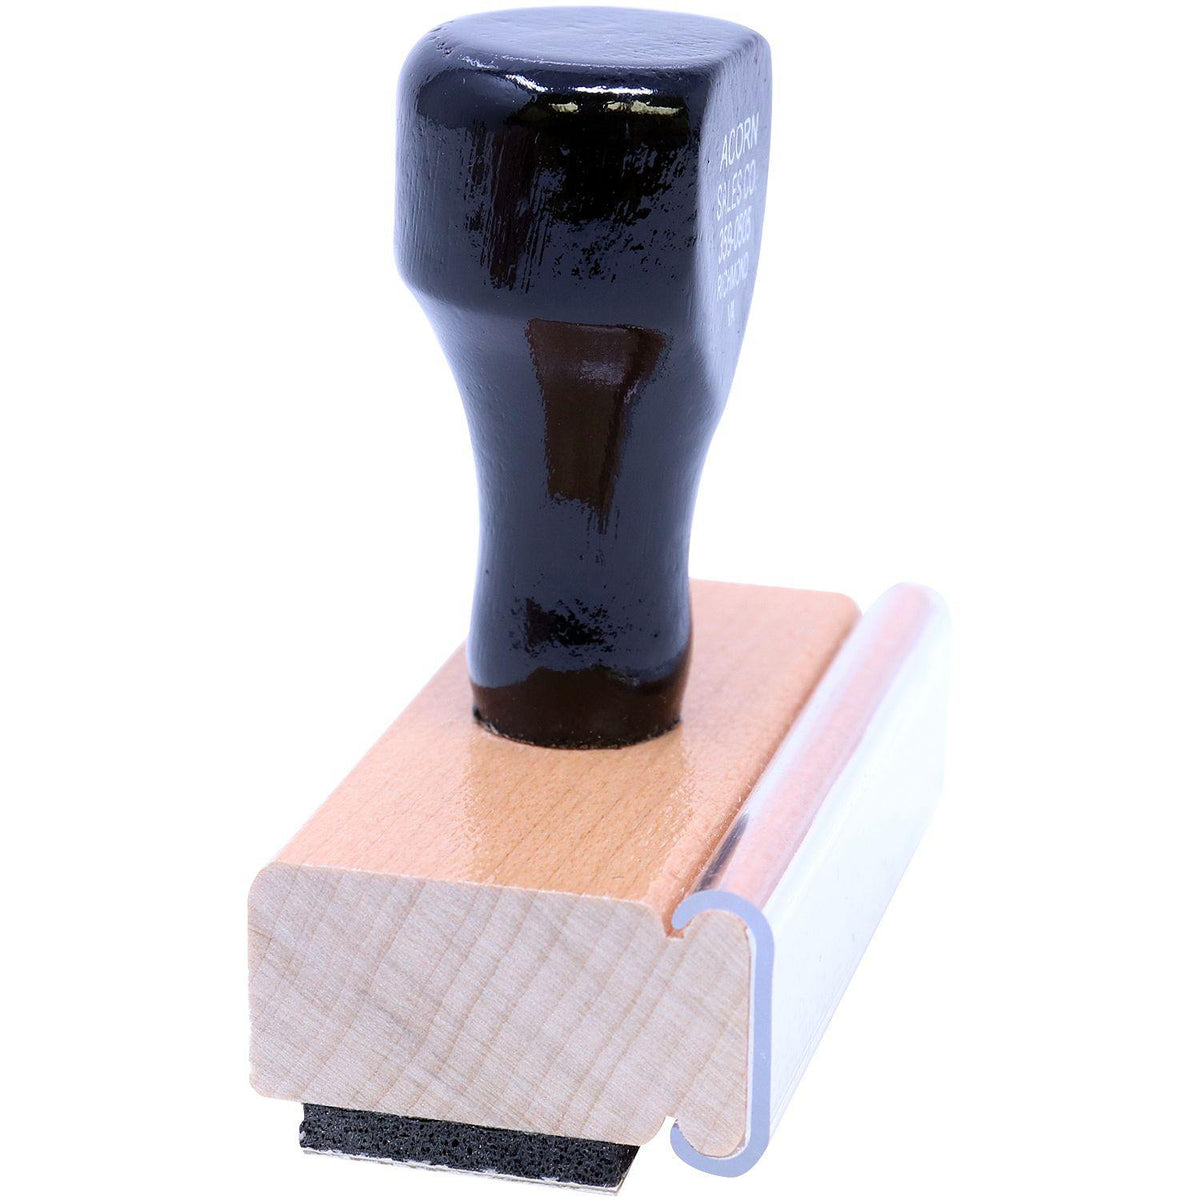 Side View of Large Retained Rubber Stamp at an Angle